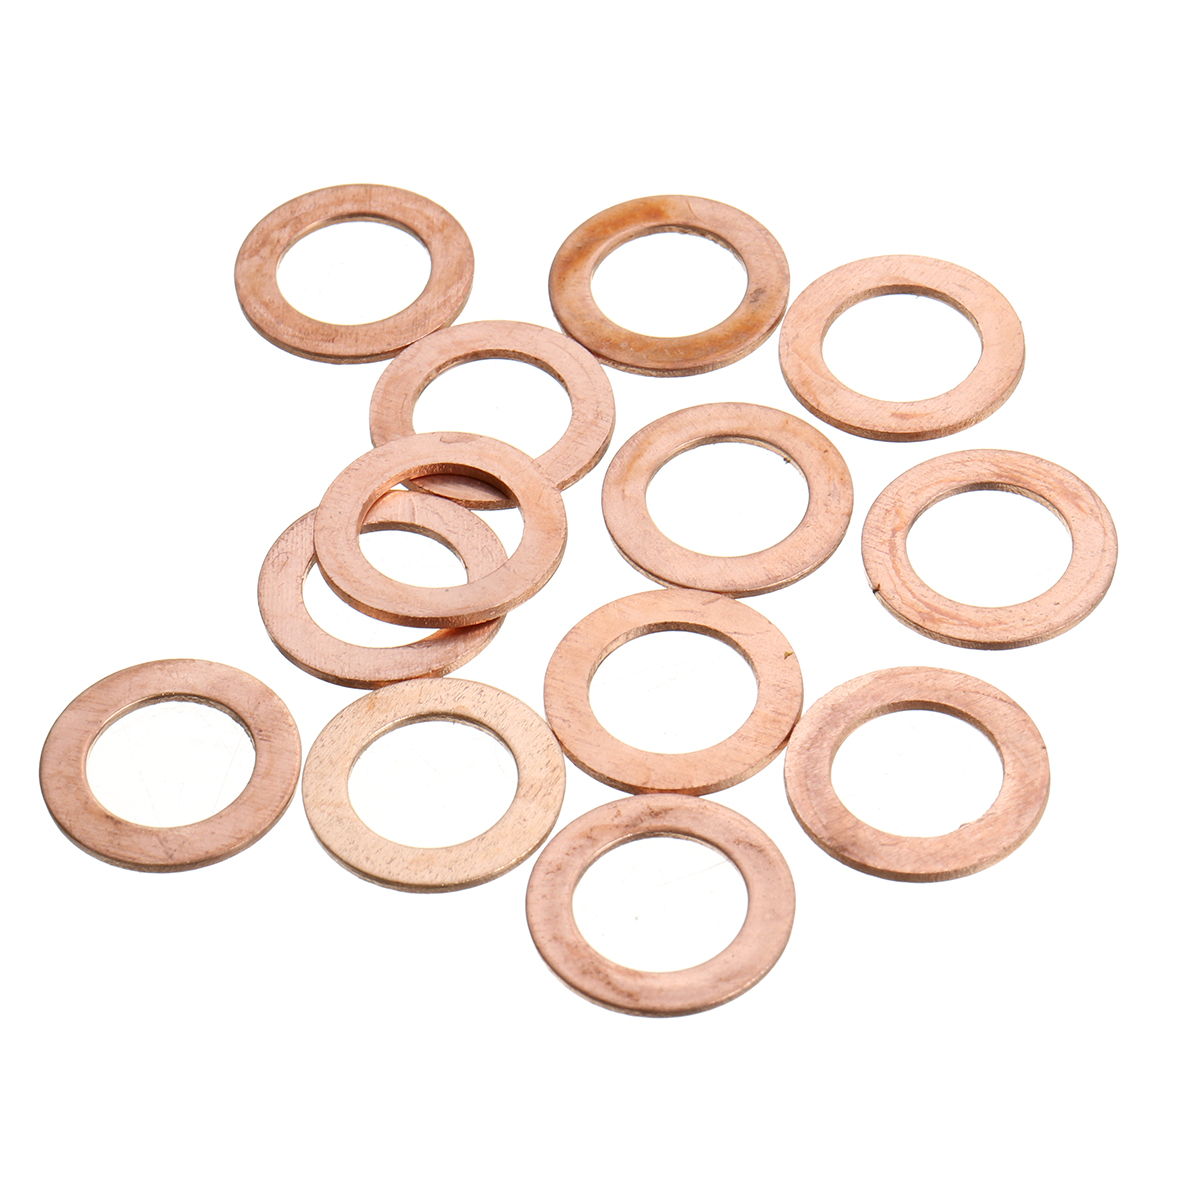 100Pcs-Assorted-Copper-Sealing-Solid-Gasket-Washer-Sump-Plug-Oil-For-Boat-Crush-Flat-Seal-Ring-Tool--1809755-7